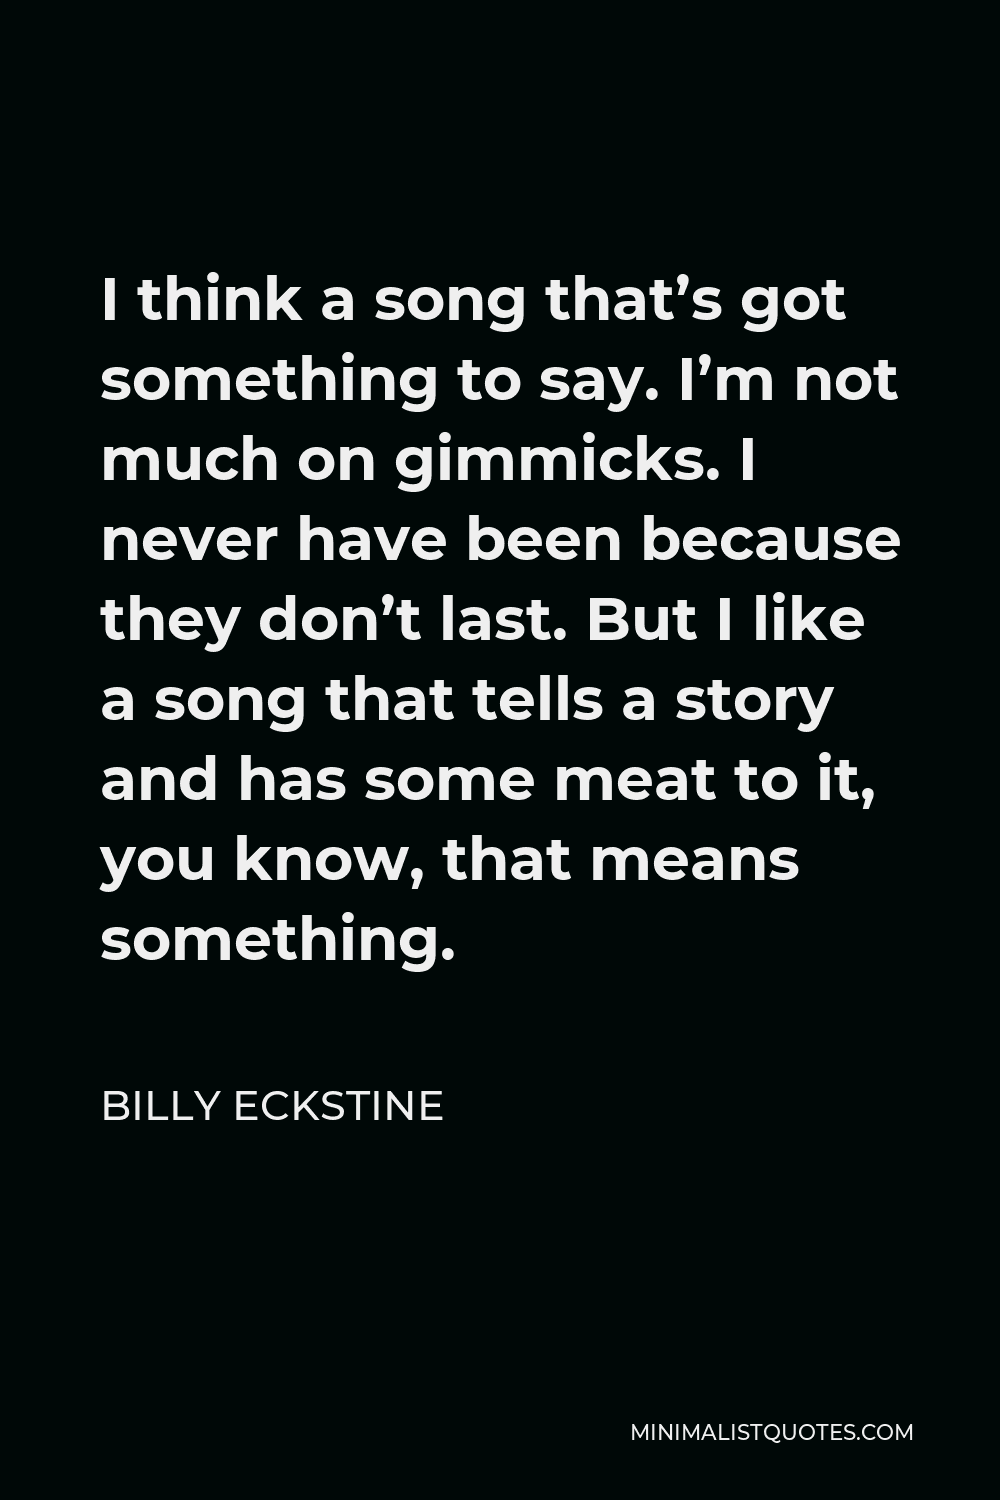 Billy Eckstine Quote - I think a song that’s got something to say. I’m not much on gimmicks. I never have been because they don’t last. But I like a song that tells a story and has some meat to it, you know, that means something.